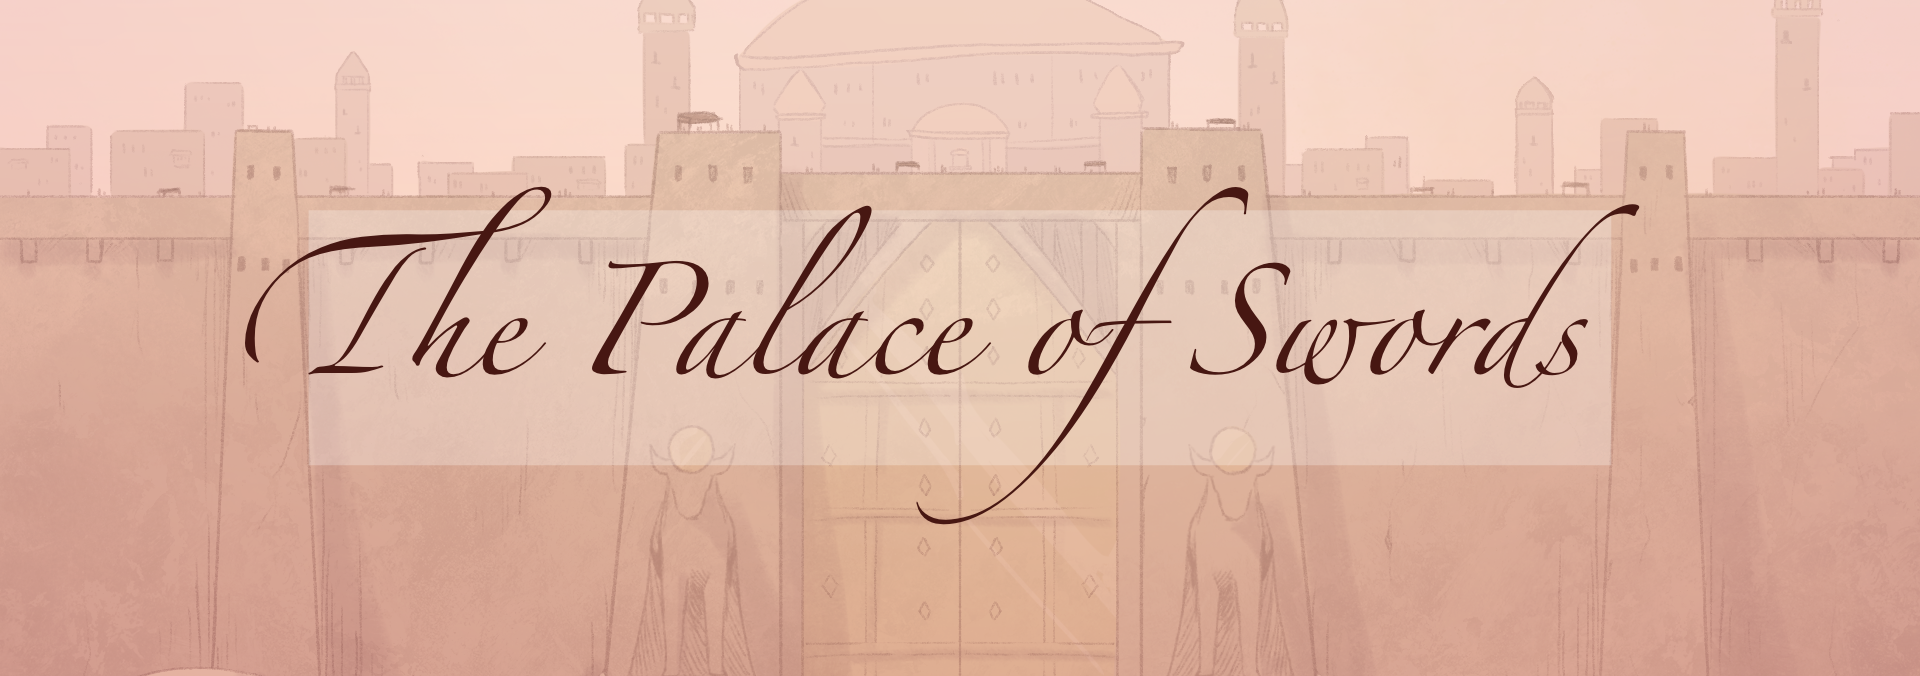 Palace of Swords Demo